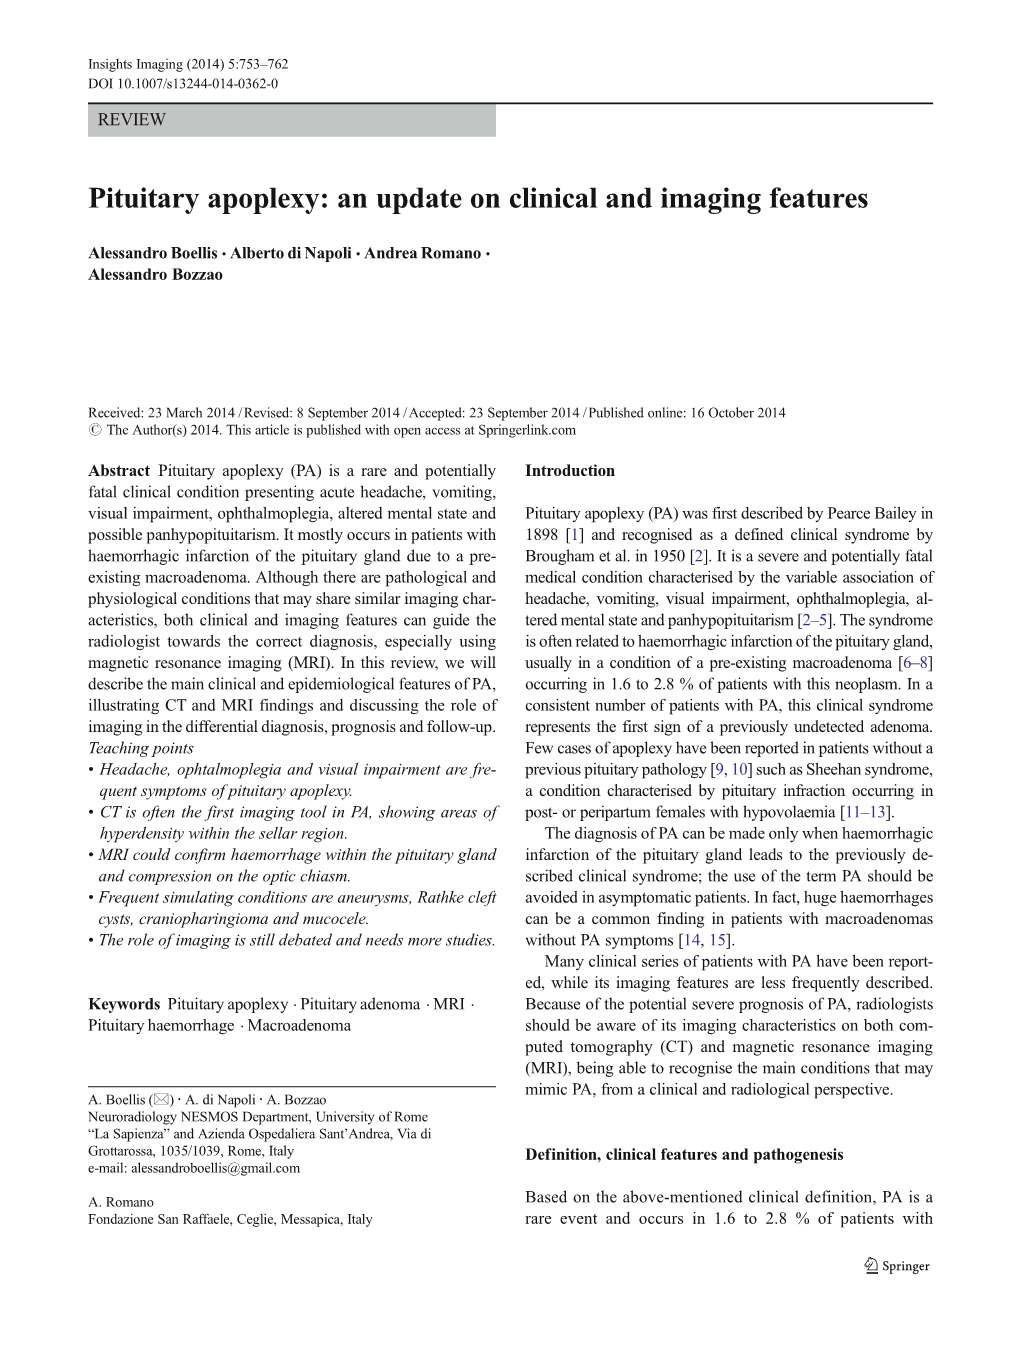 Pituitary Apoplexy: an Update on Clinical and Imaging Features